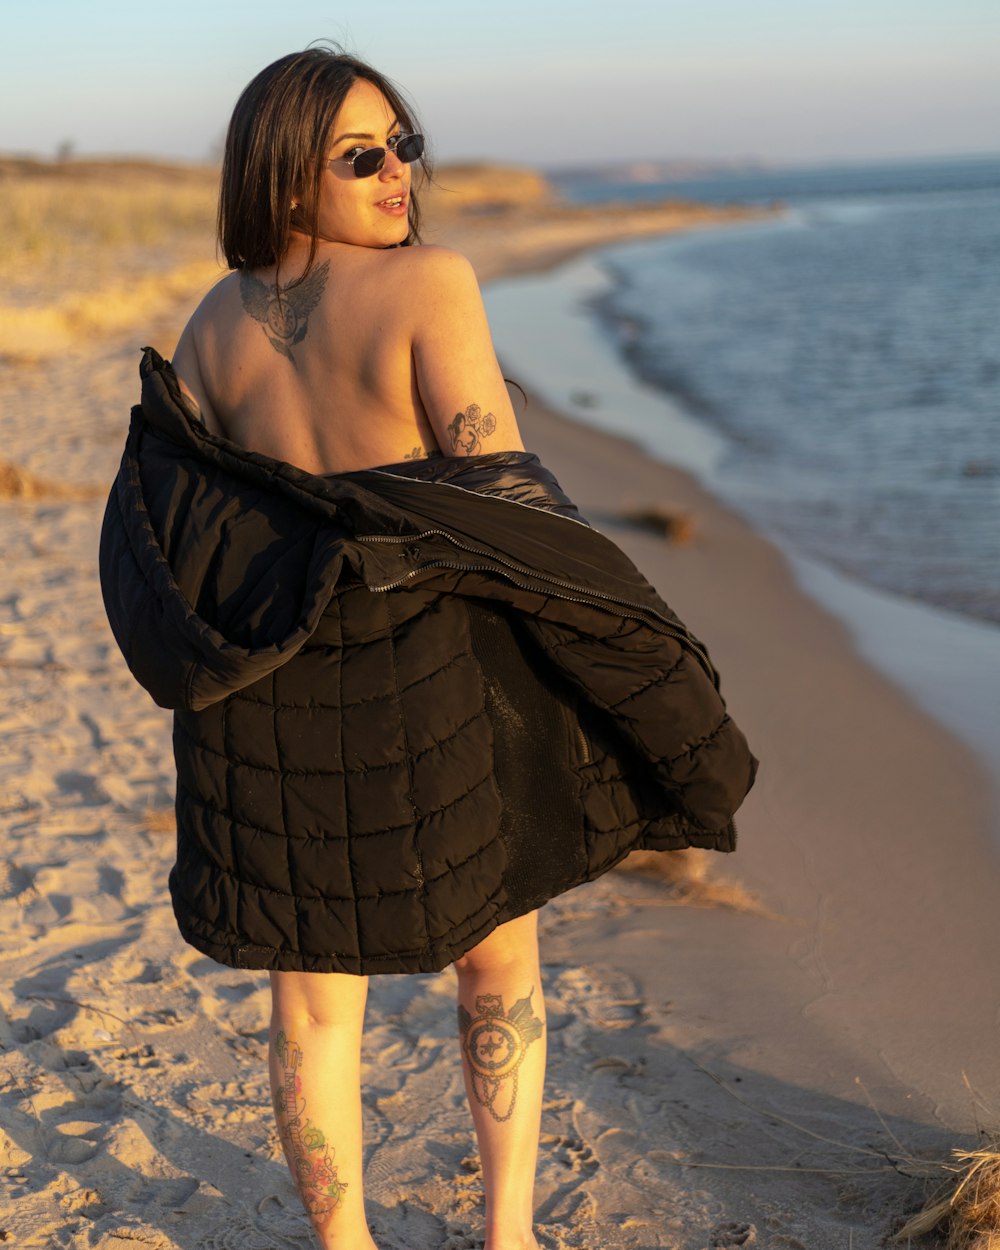 shallow focus photo of woman in black top standing on seashore